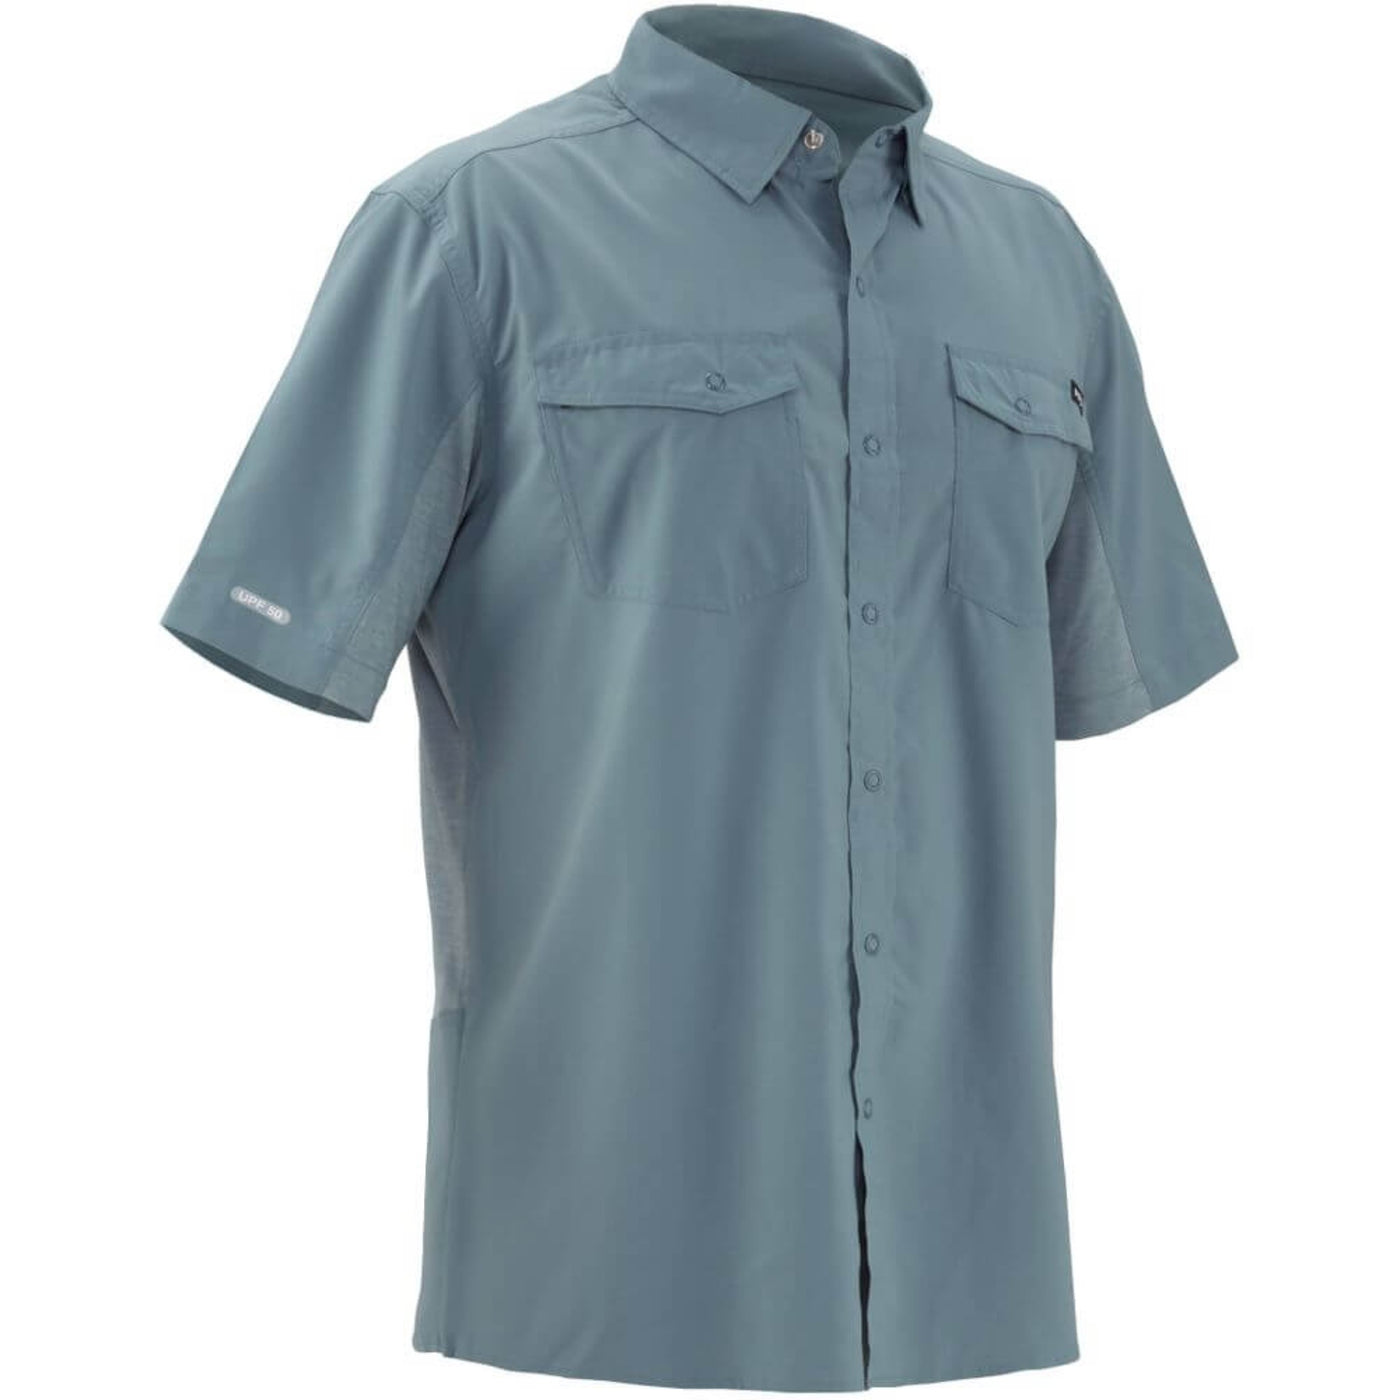 NRS Men's Short-Sleeve Guide Shirt | NRS NZ Men's Paddle Clothing | Further Faster Christchurch NZ | #lead